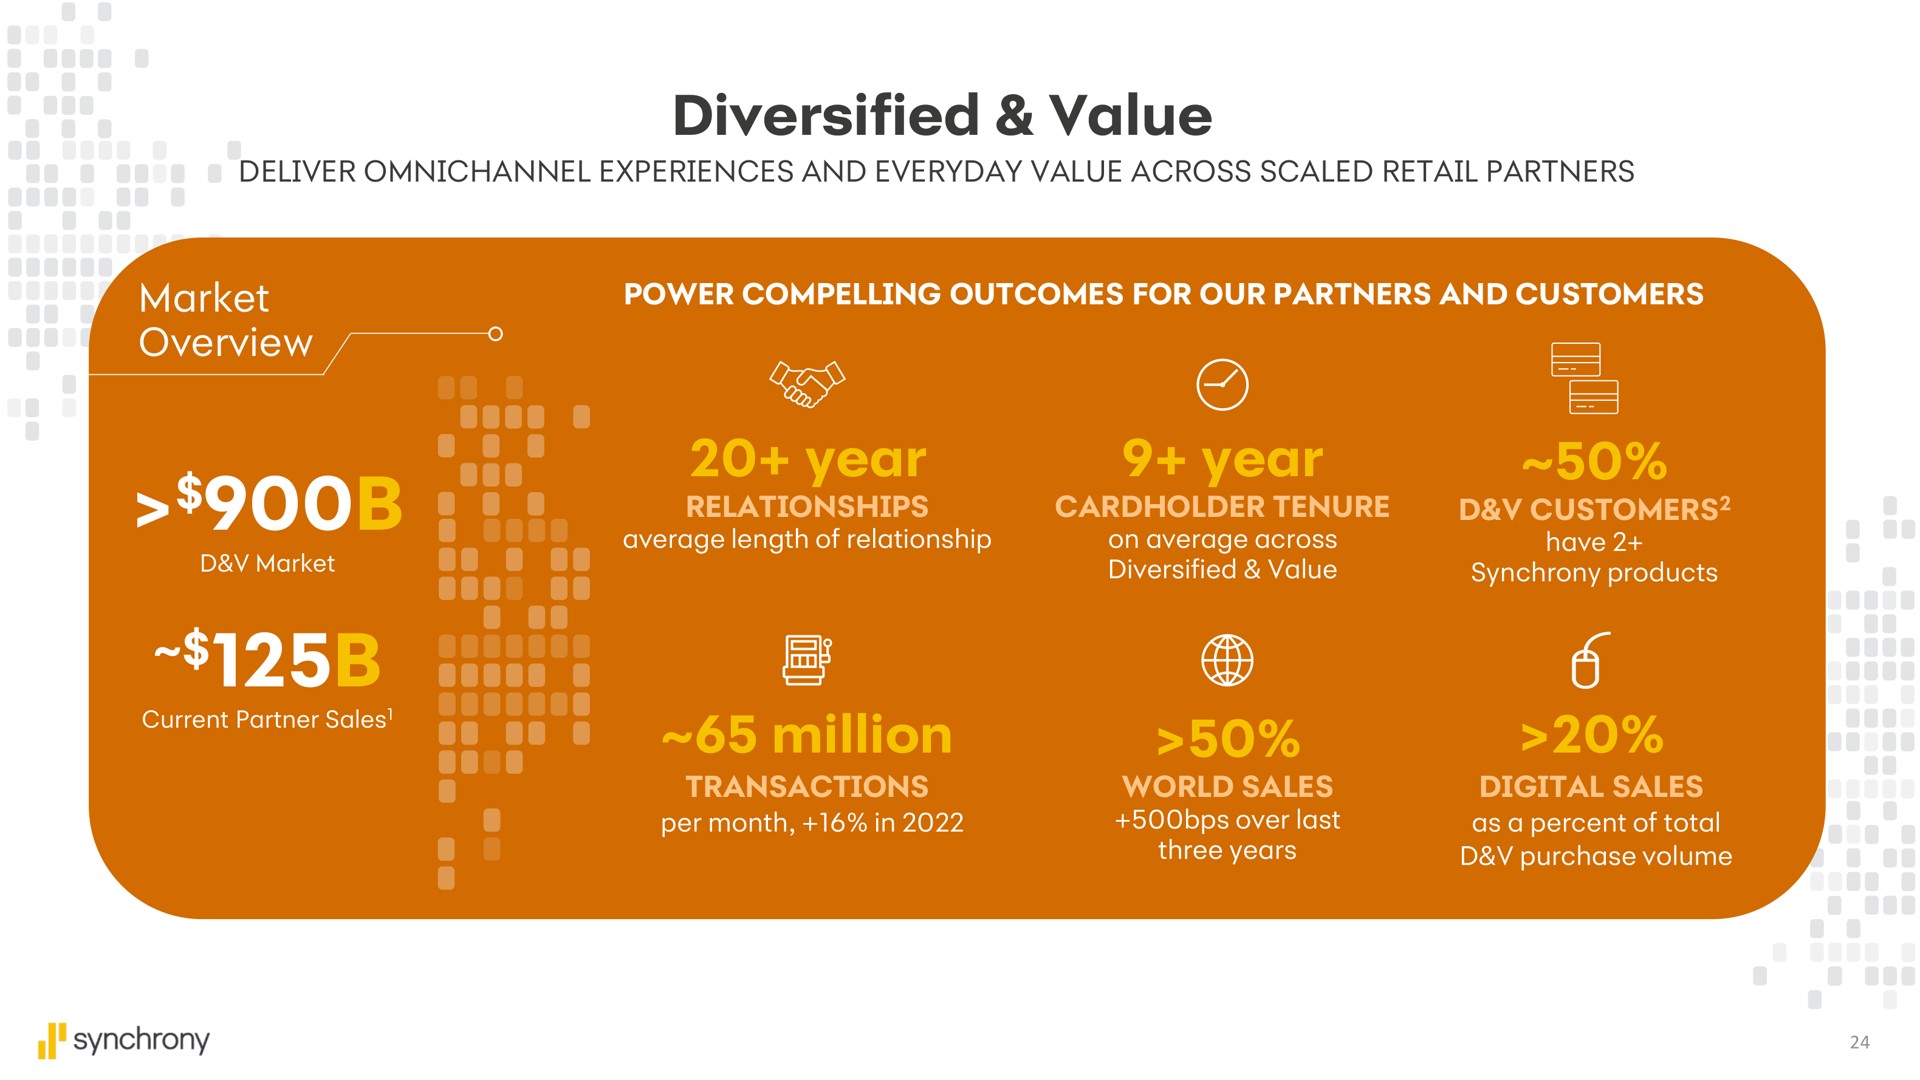 diversified value year year million market power compelling outcomes for our partners and customers a a | Synchrony Financial